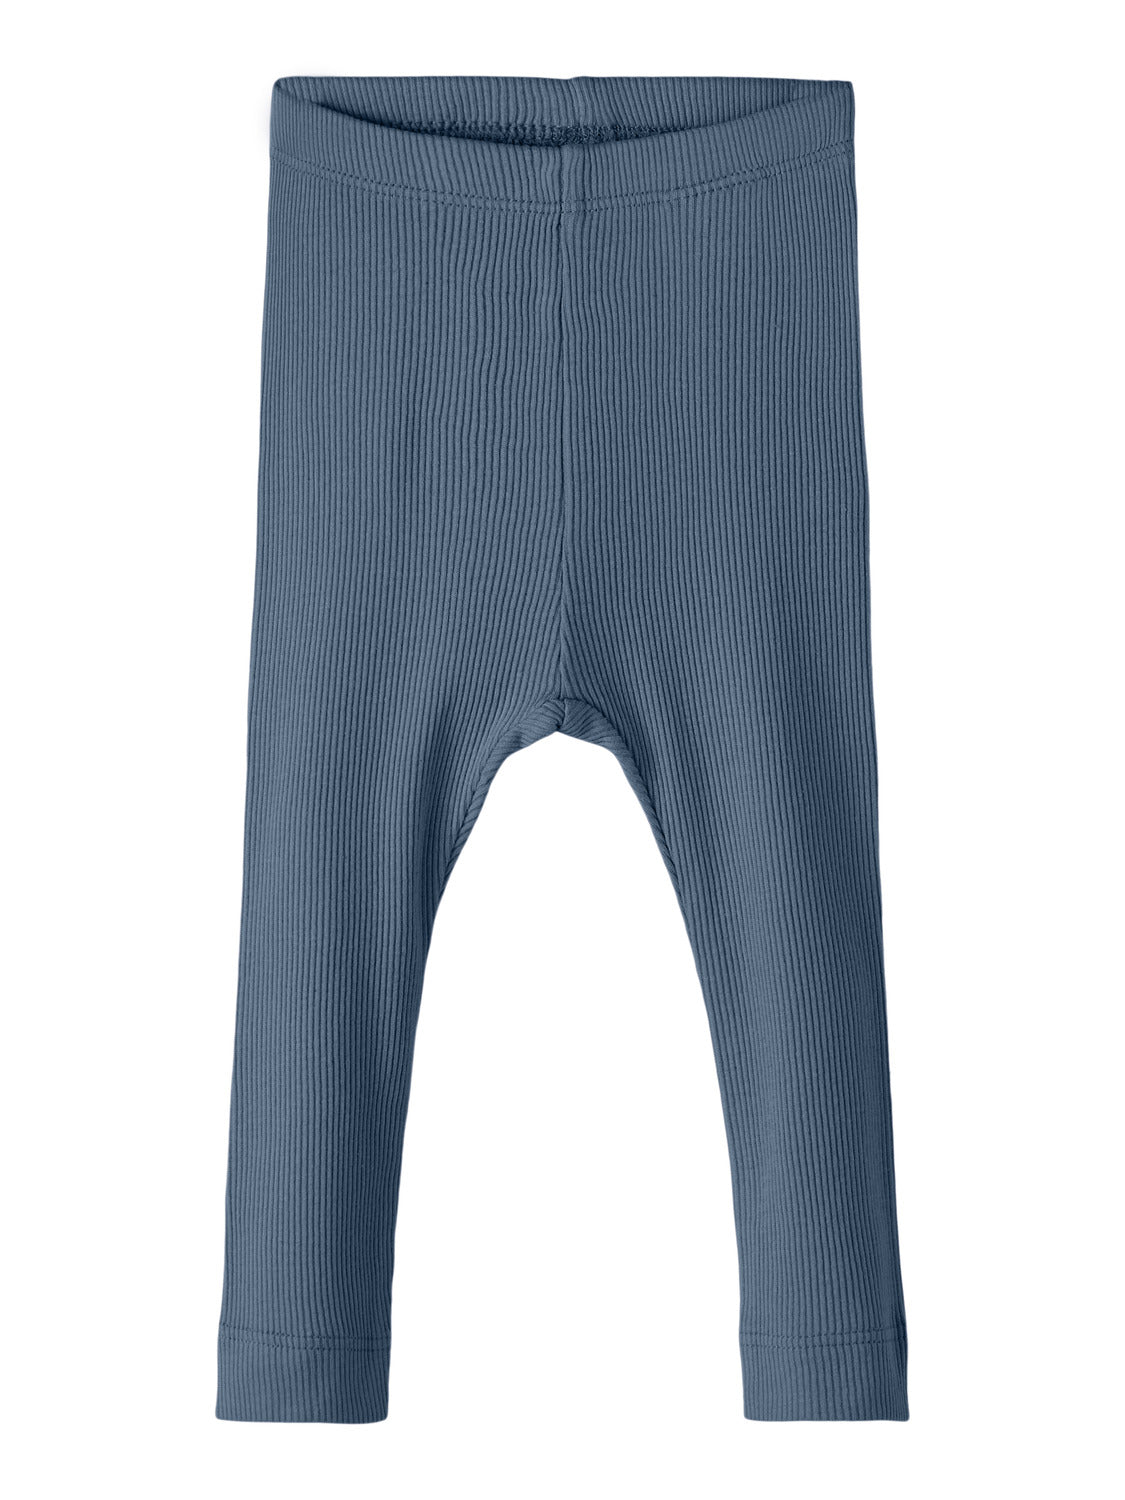 NBNKAB Trousers - Bluefin